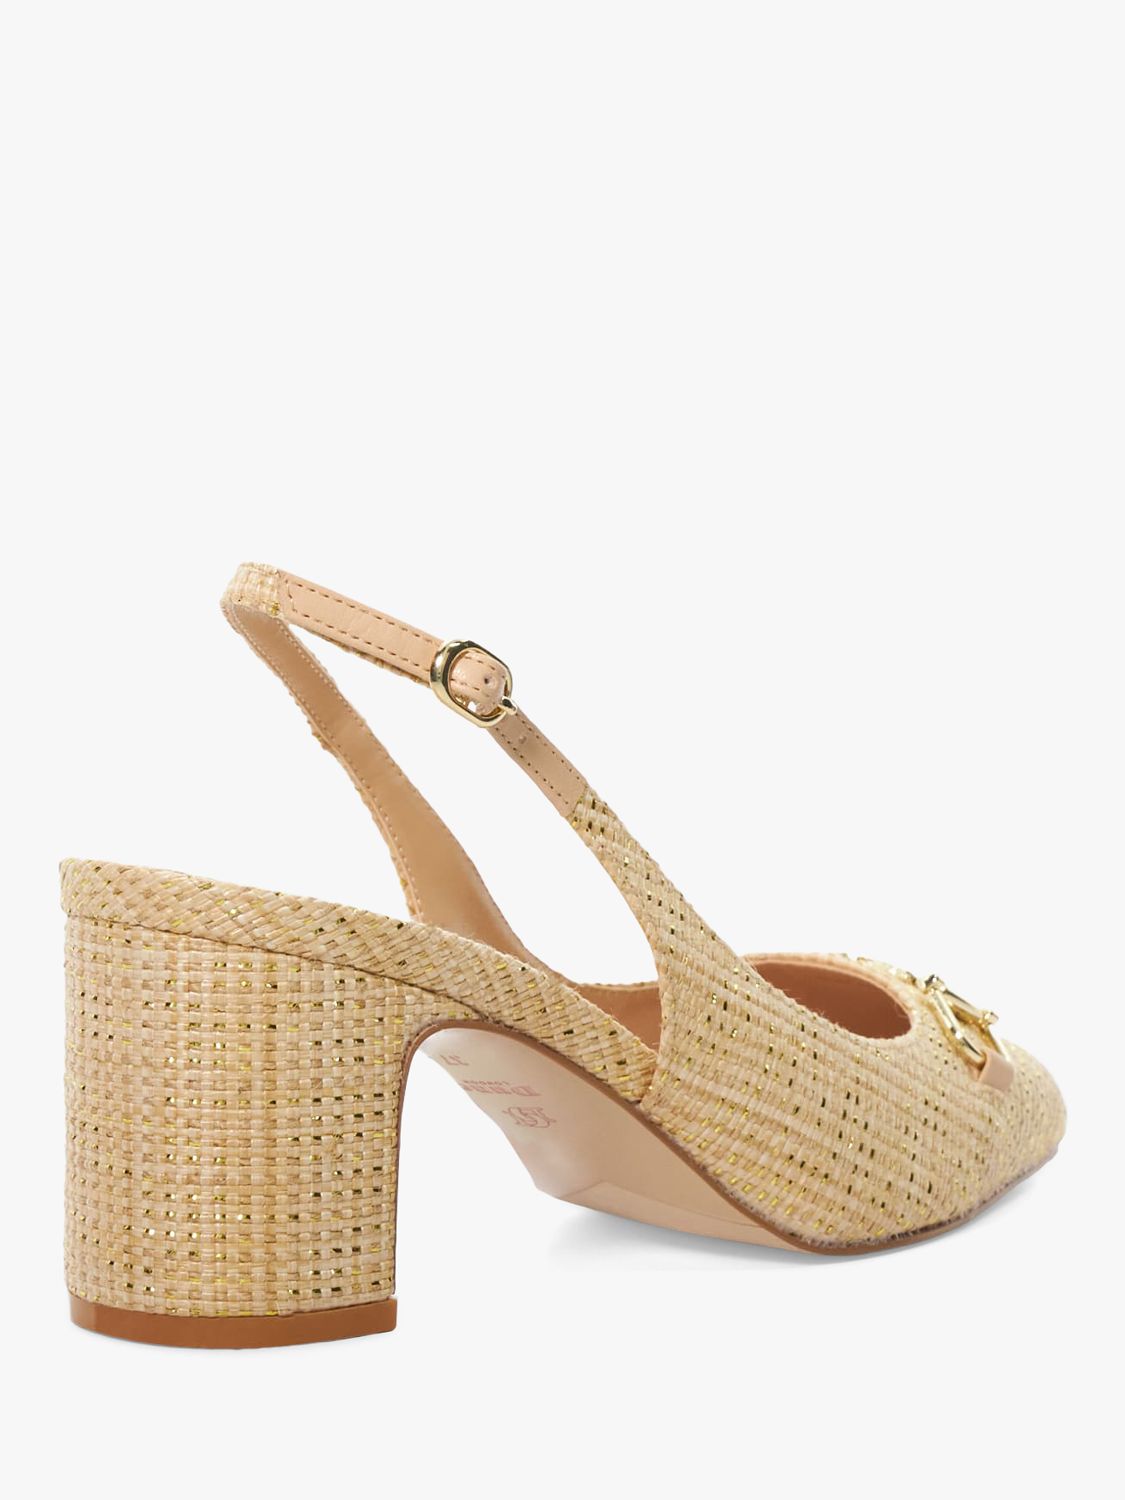 Buy Dune Choices Block Heel Court Shoes, Natural Online at johnlewis.com